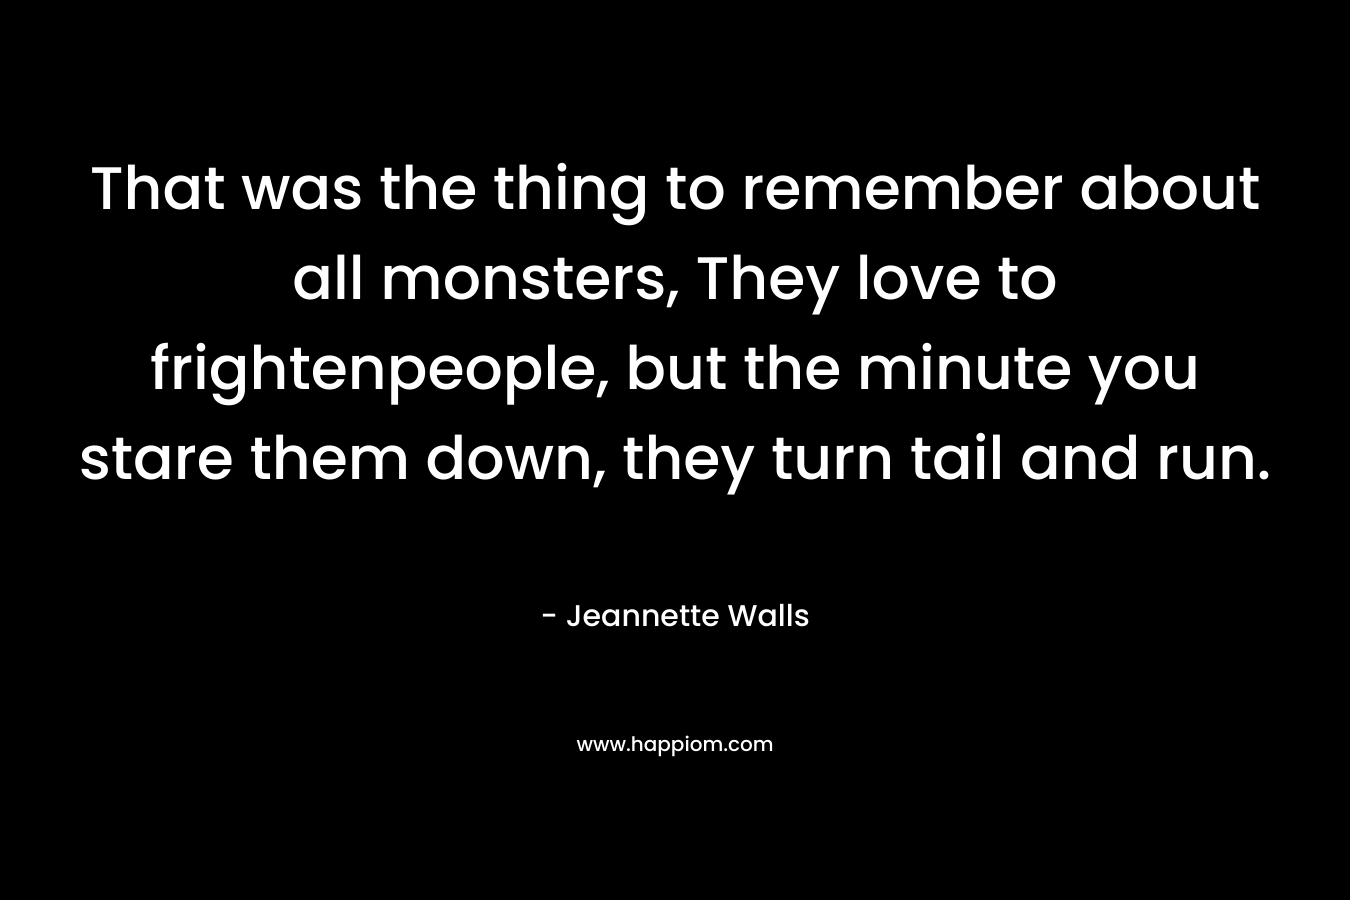 That was the thing to remember about all monsters, They love to frightenpeople, but the minute you stare them down, they turn tail and run. – Jeannette Walls